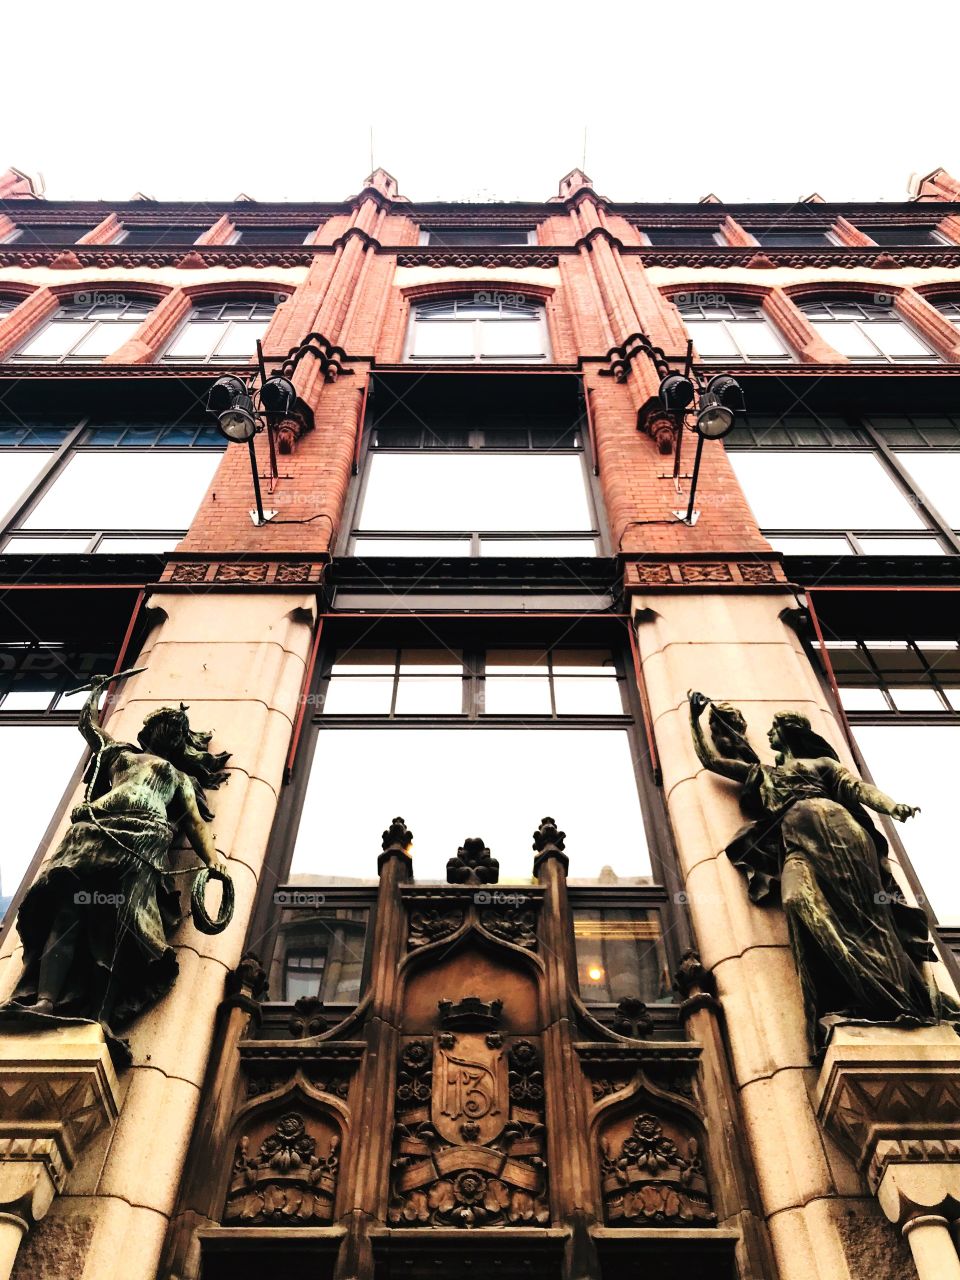 A delightful building in the style of Northern Art Nouveau in the streets of Helsinki. Such buildings can be found in the Petrogradsky district of St. Petersburg. Suomi 🇫🇮